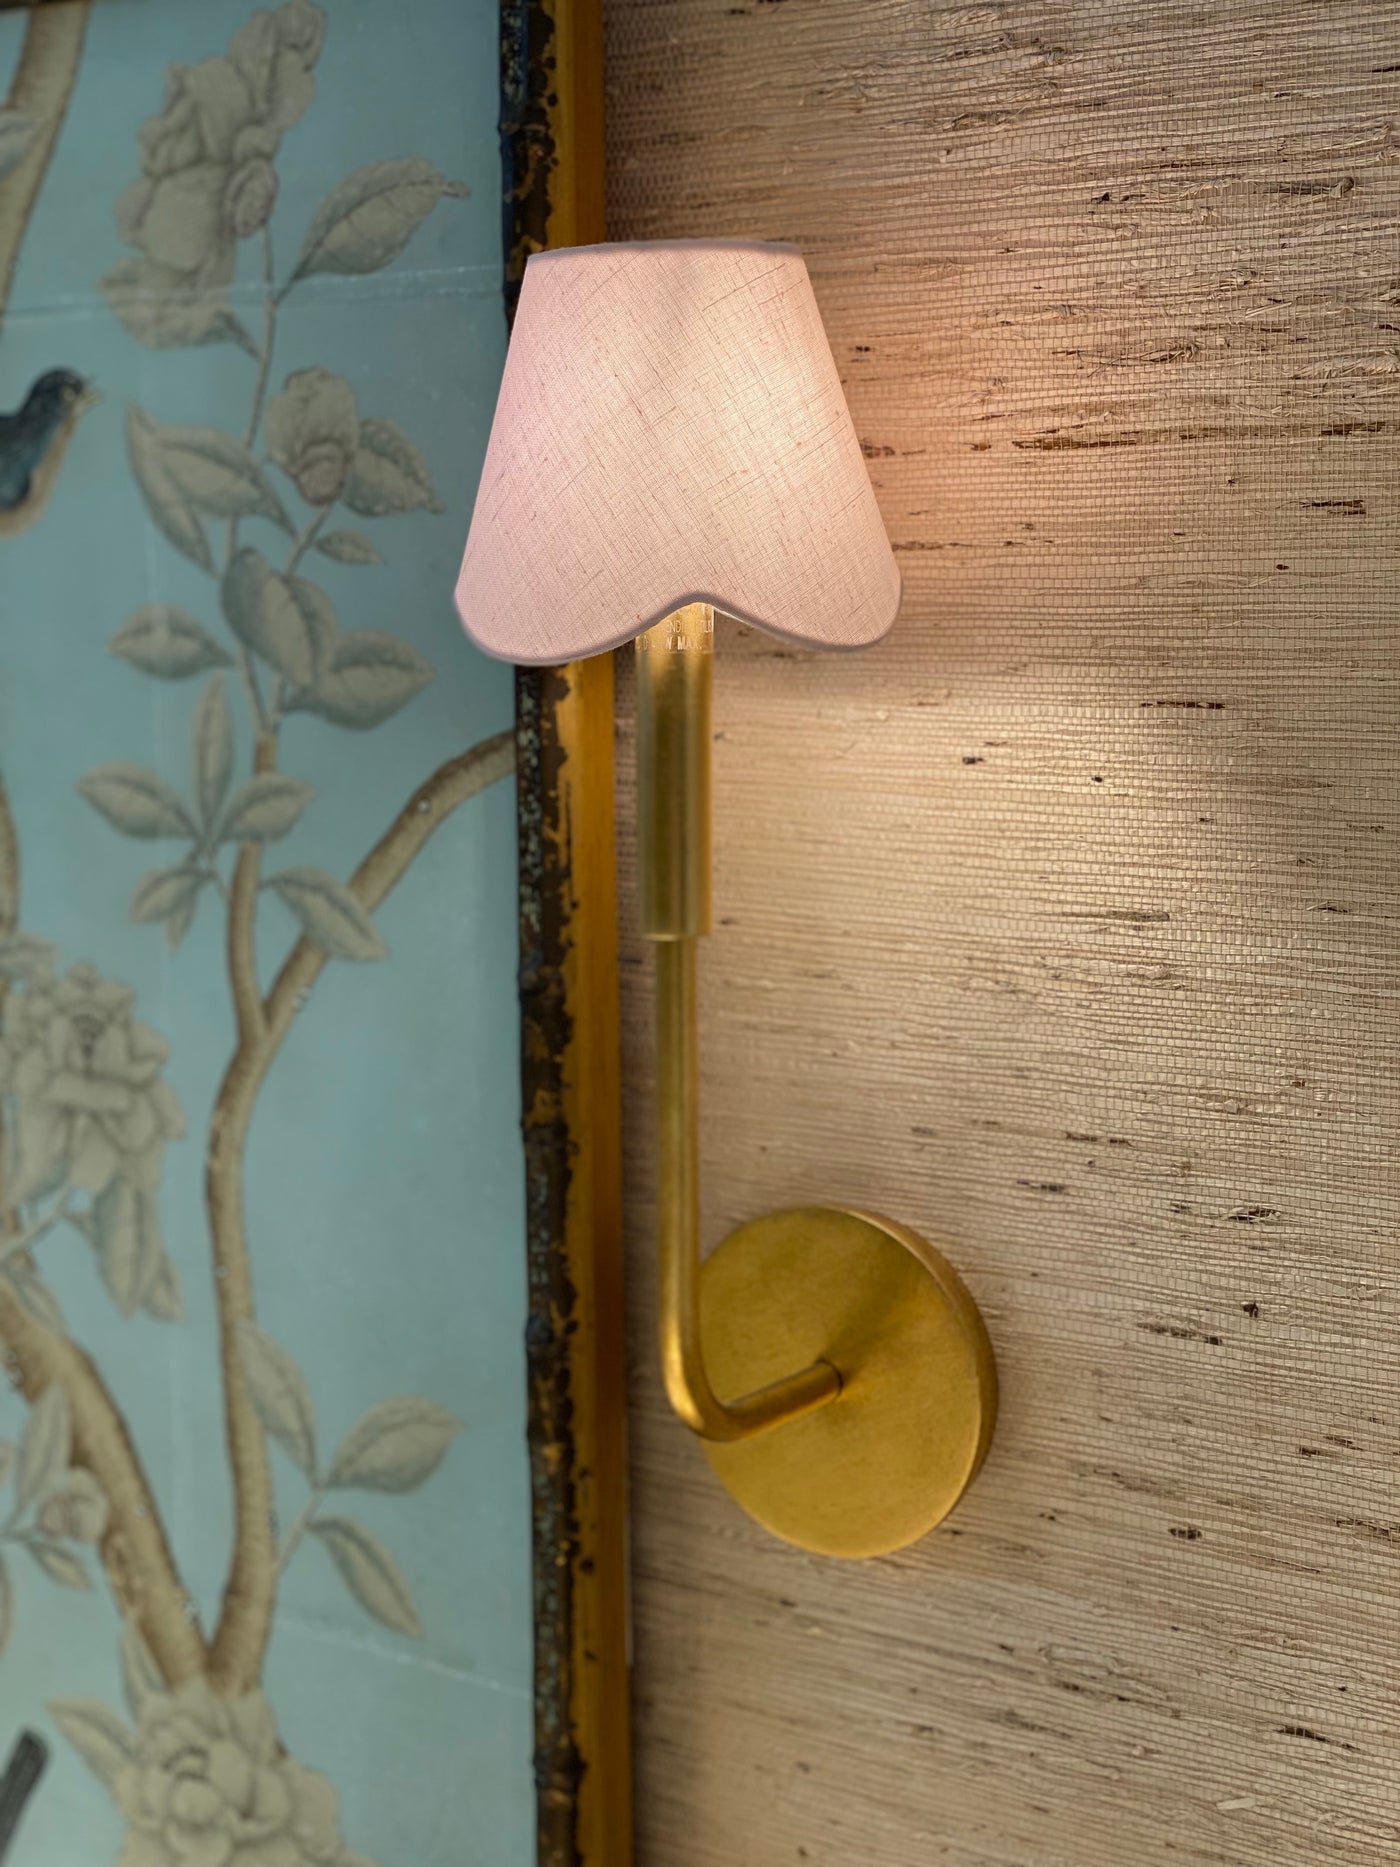 Pink scalloped sconce/chandelier shade